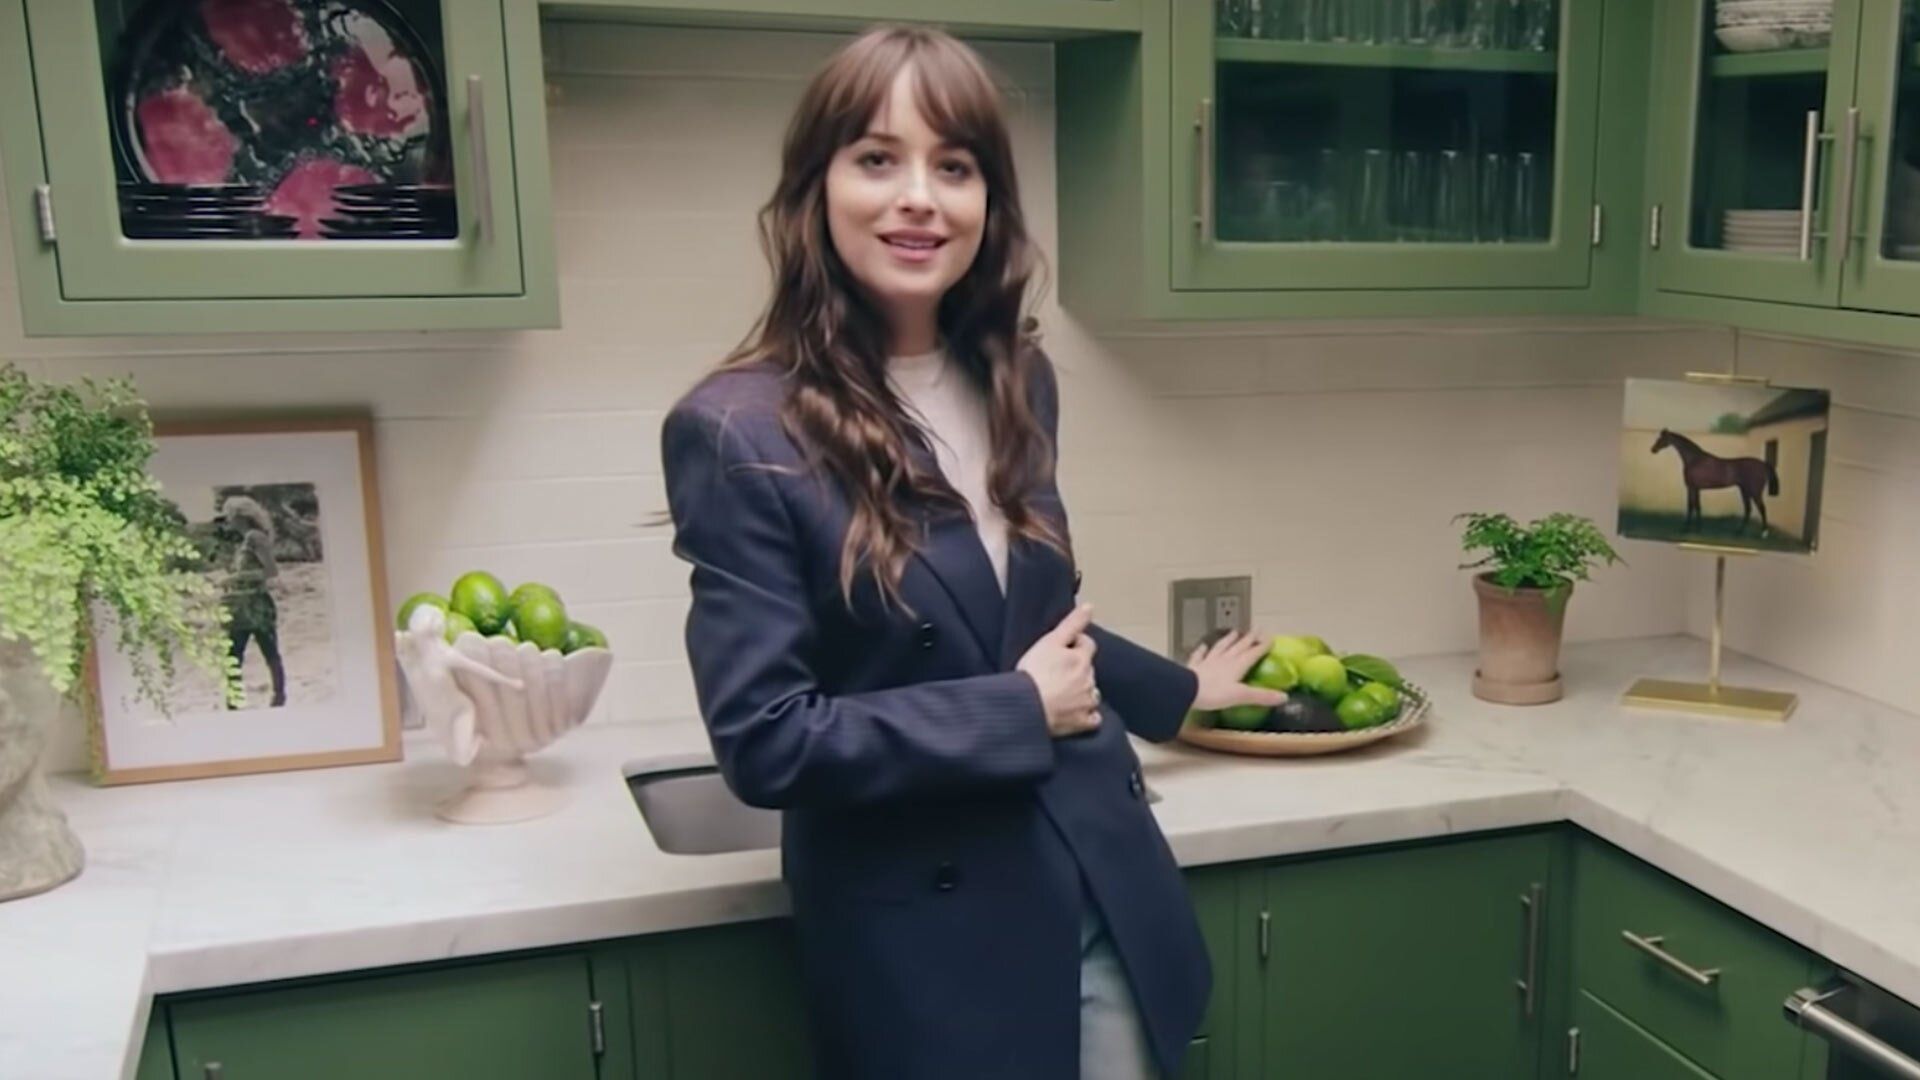 Dakota Johnson Reveals She's Actually Allergic to Limes After Claiming to Love Them: 'I Just Lied'